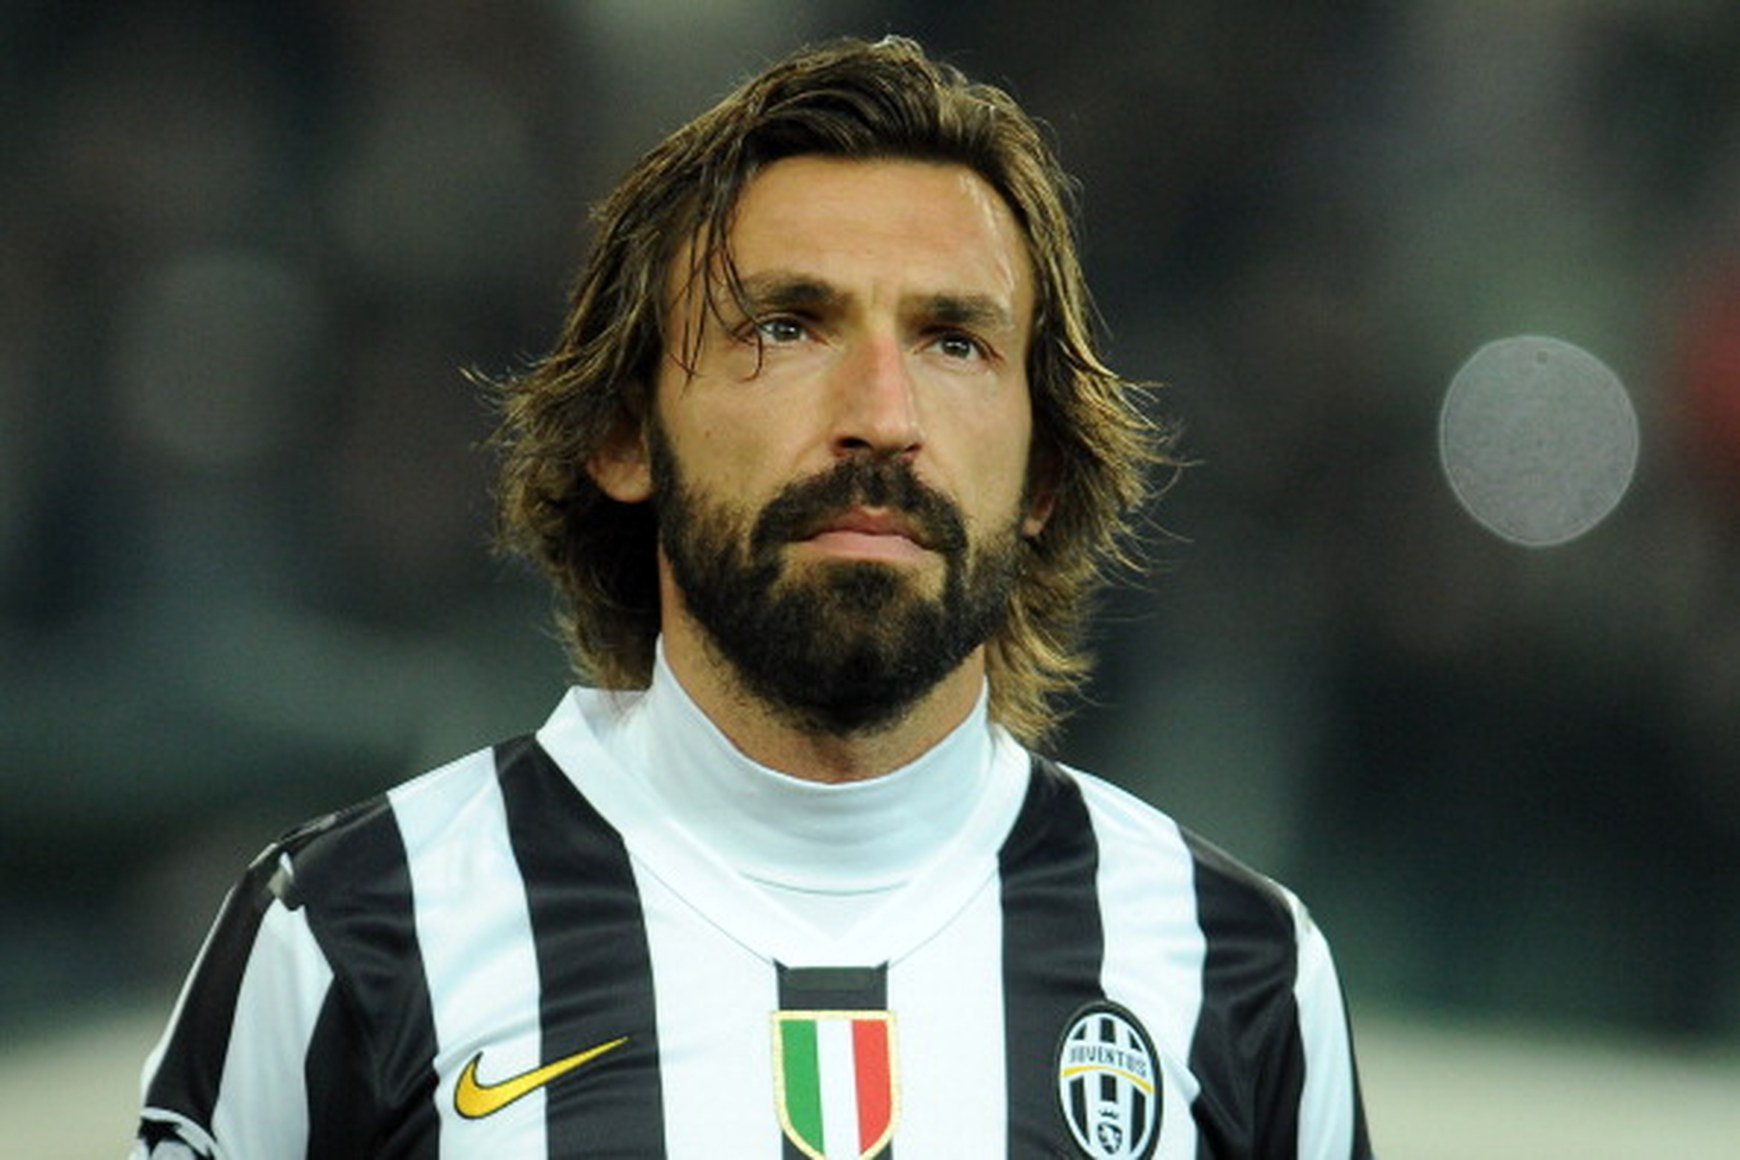 Andrea Pirlo Backgrounds, Compatible - PC, Mobile, Gadgets| 1740x1160 px